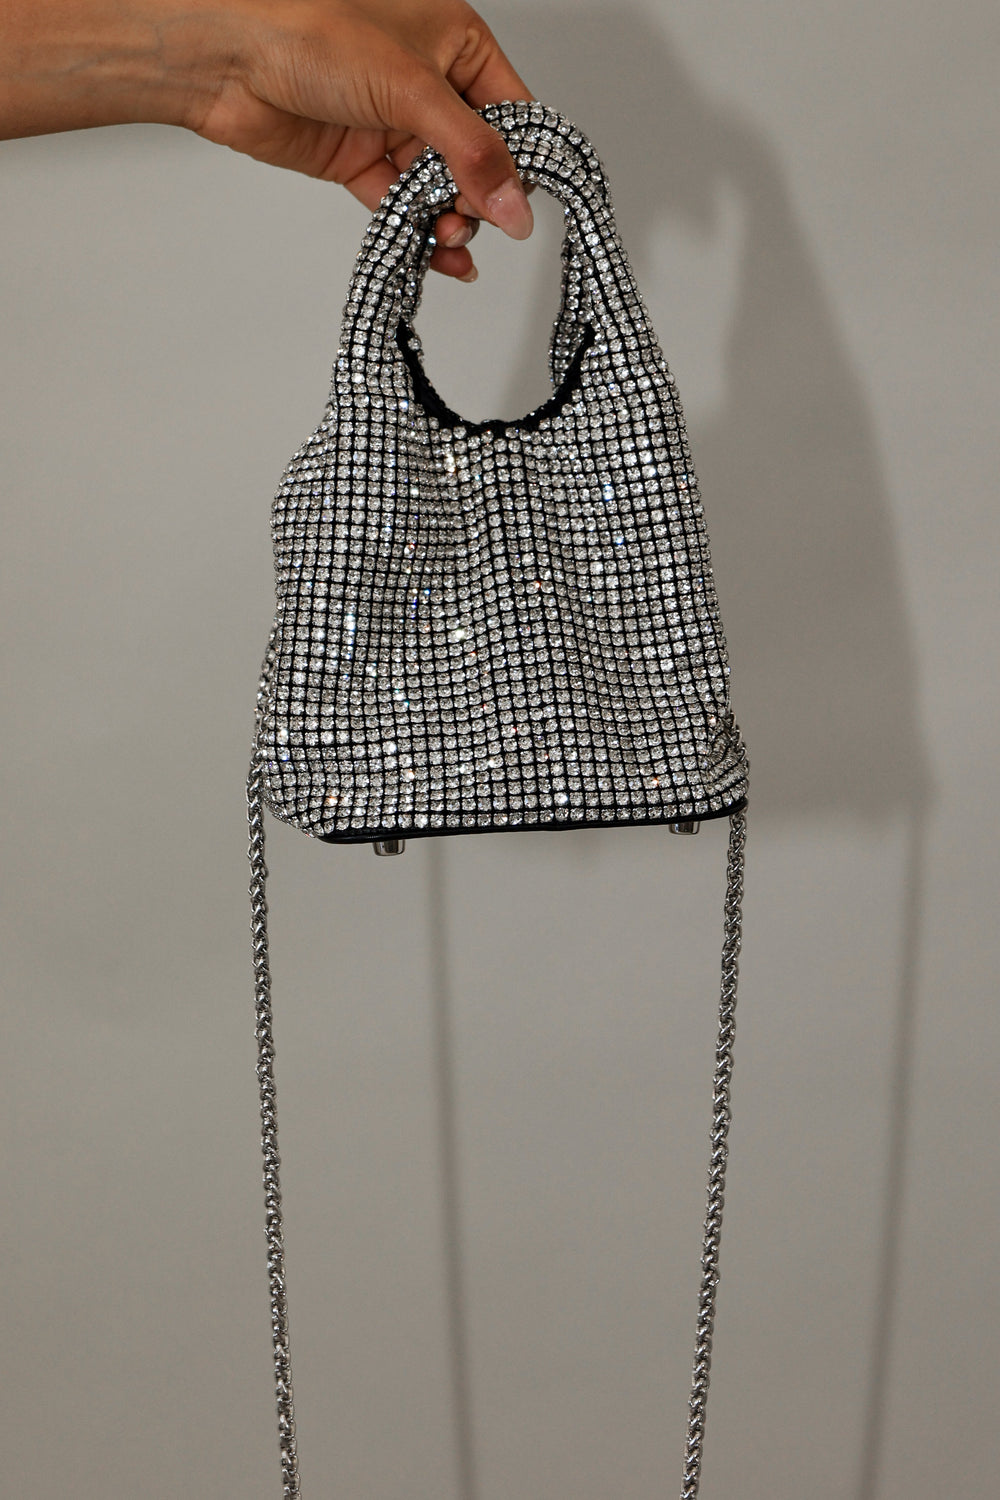 Petal and Pup USA ACCESSORIES Demie Rhinestone Bag - Silver One Size